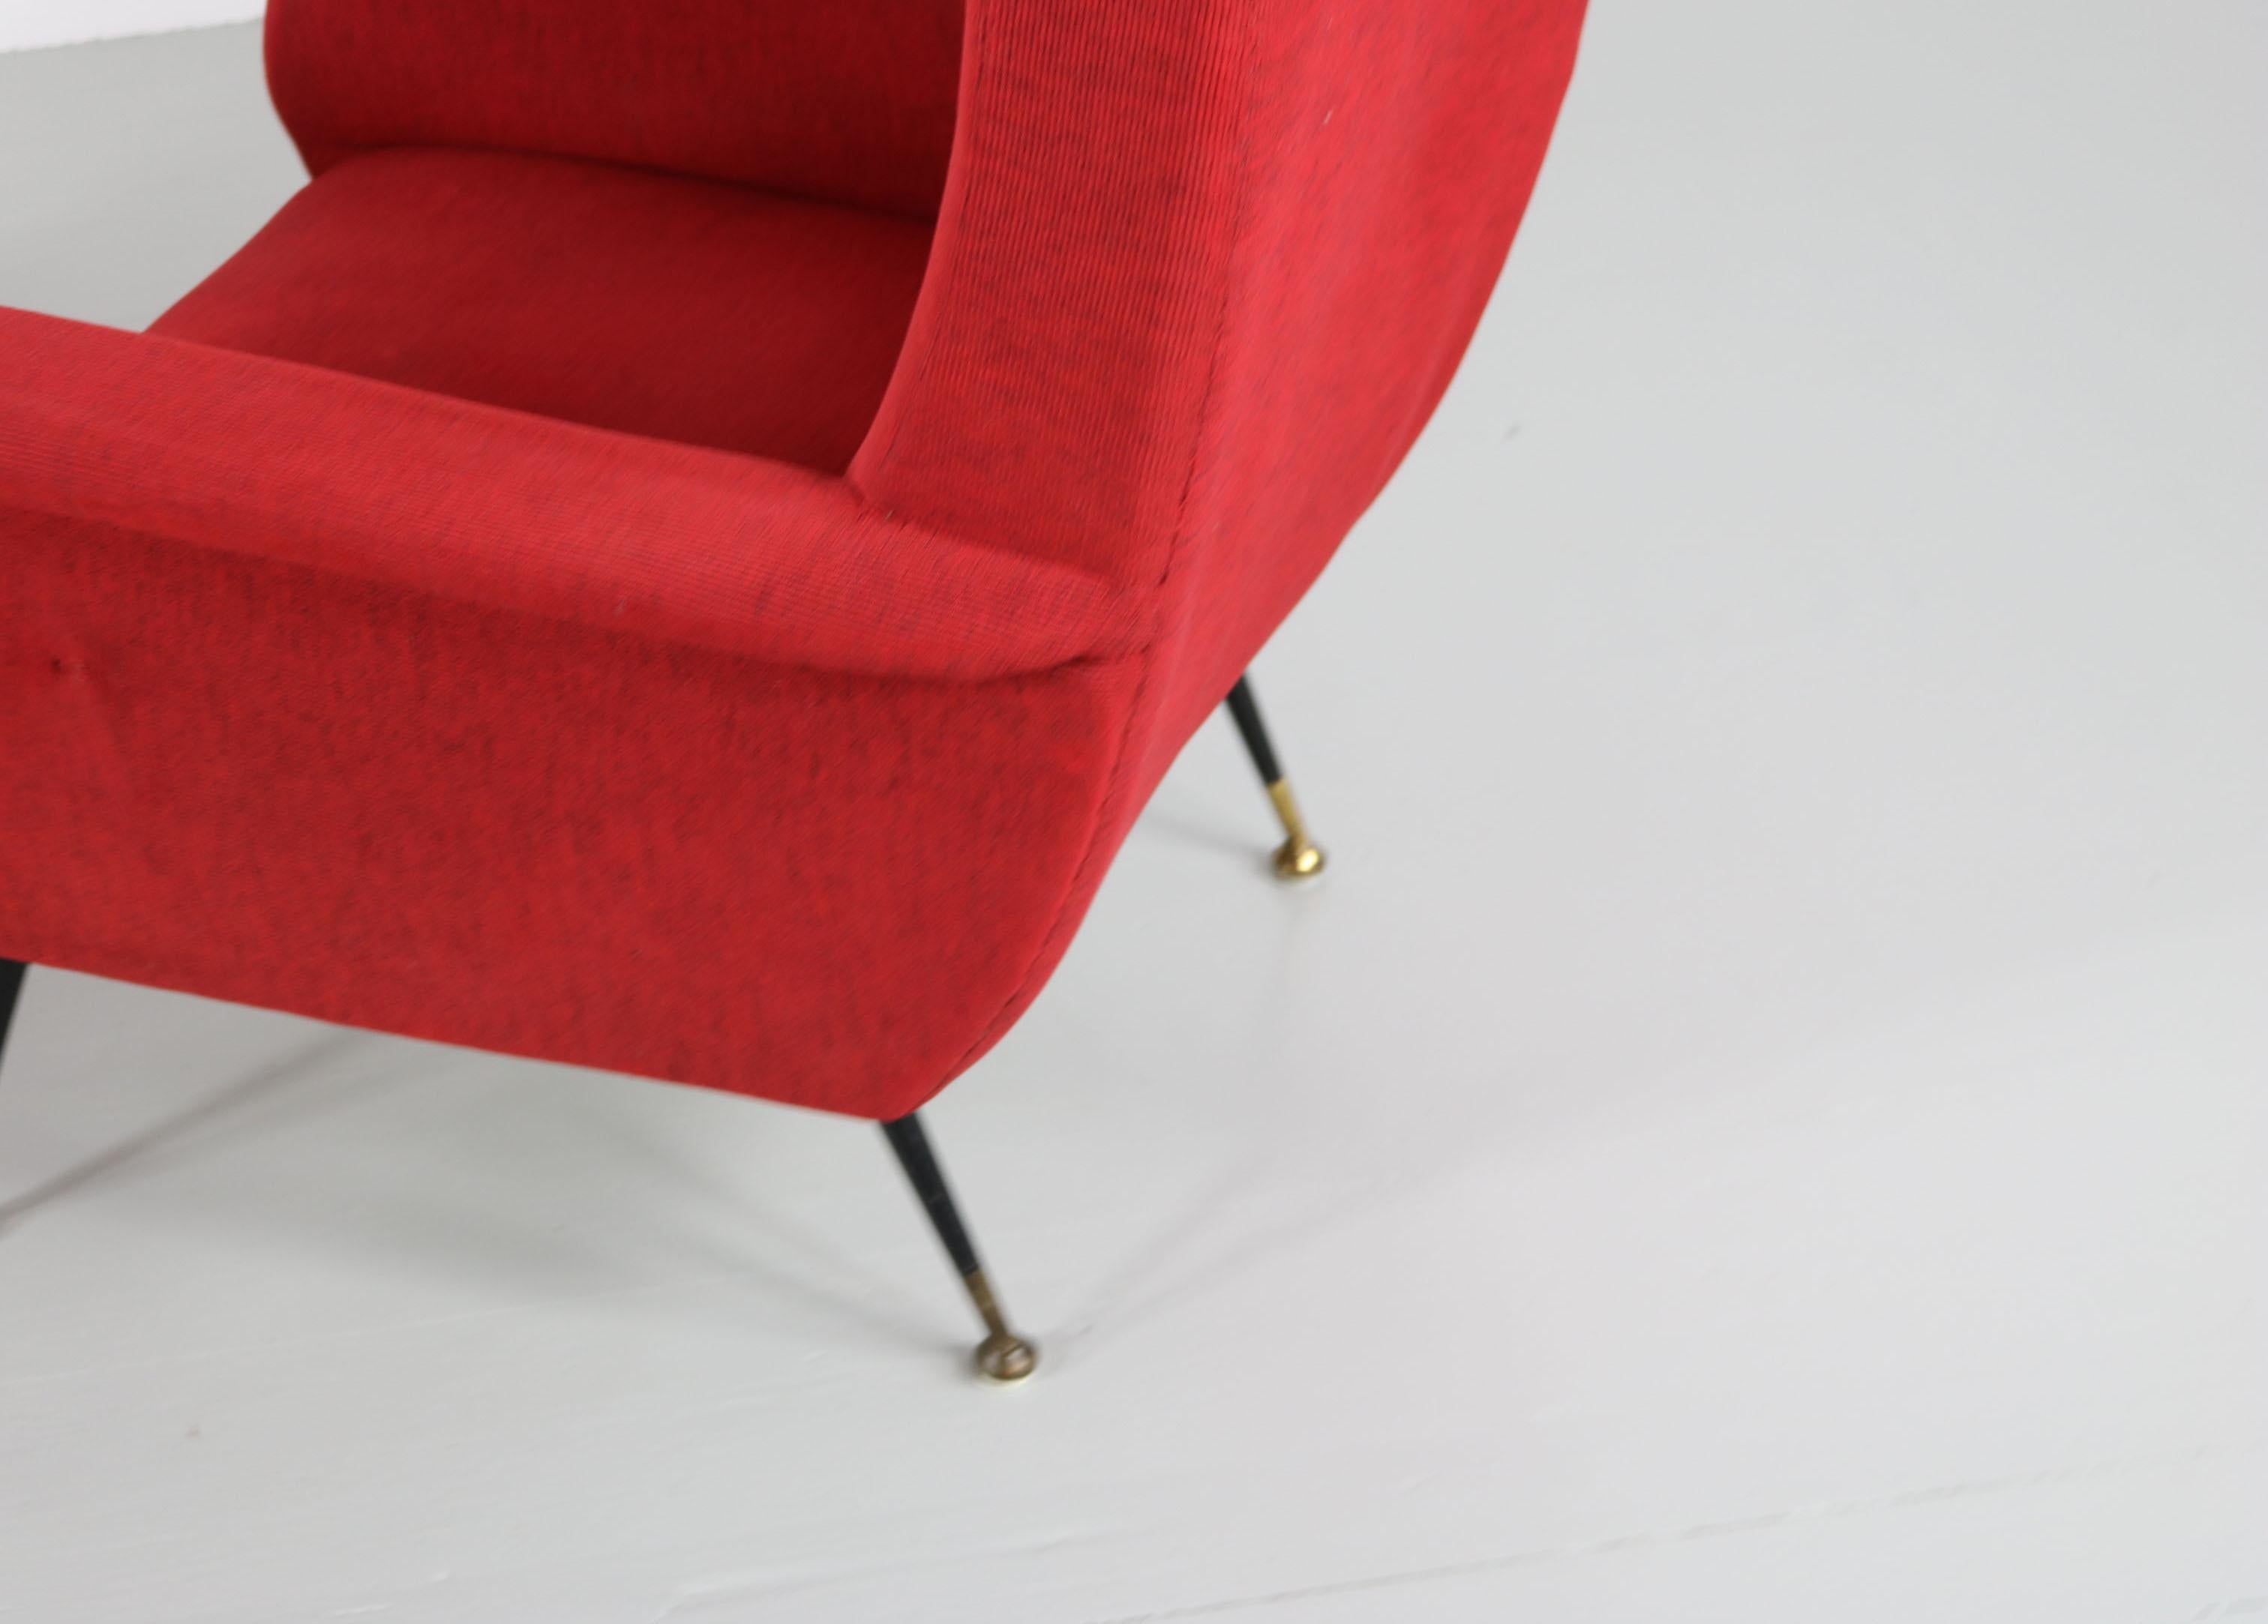 Red Upholstered Armchair with Metal Base, Brass Elements, 1950s For Sale 4